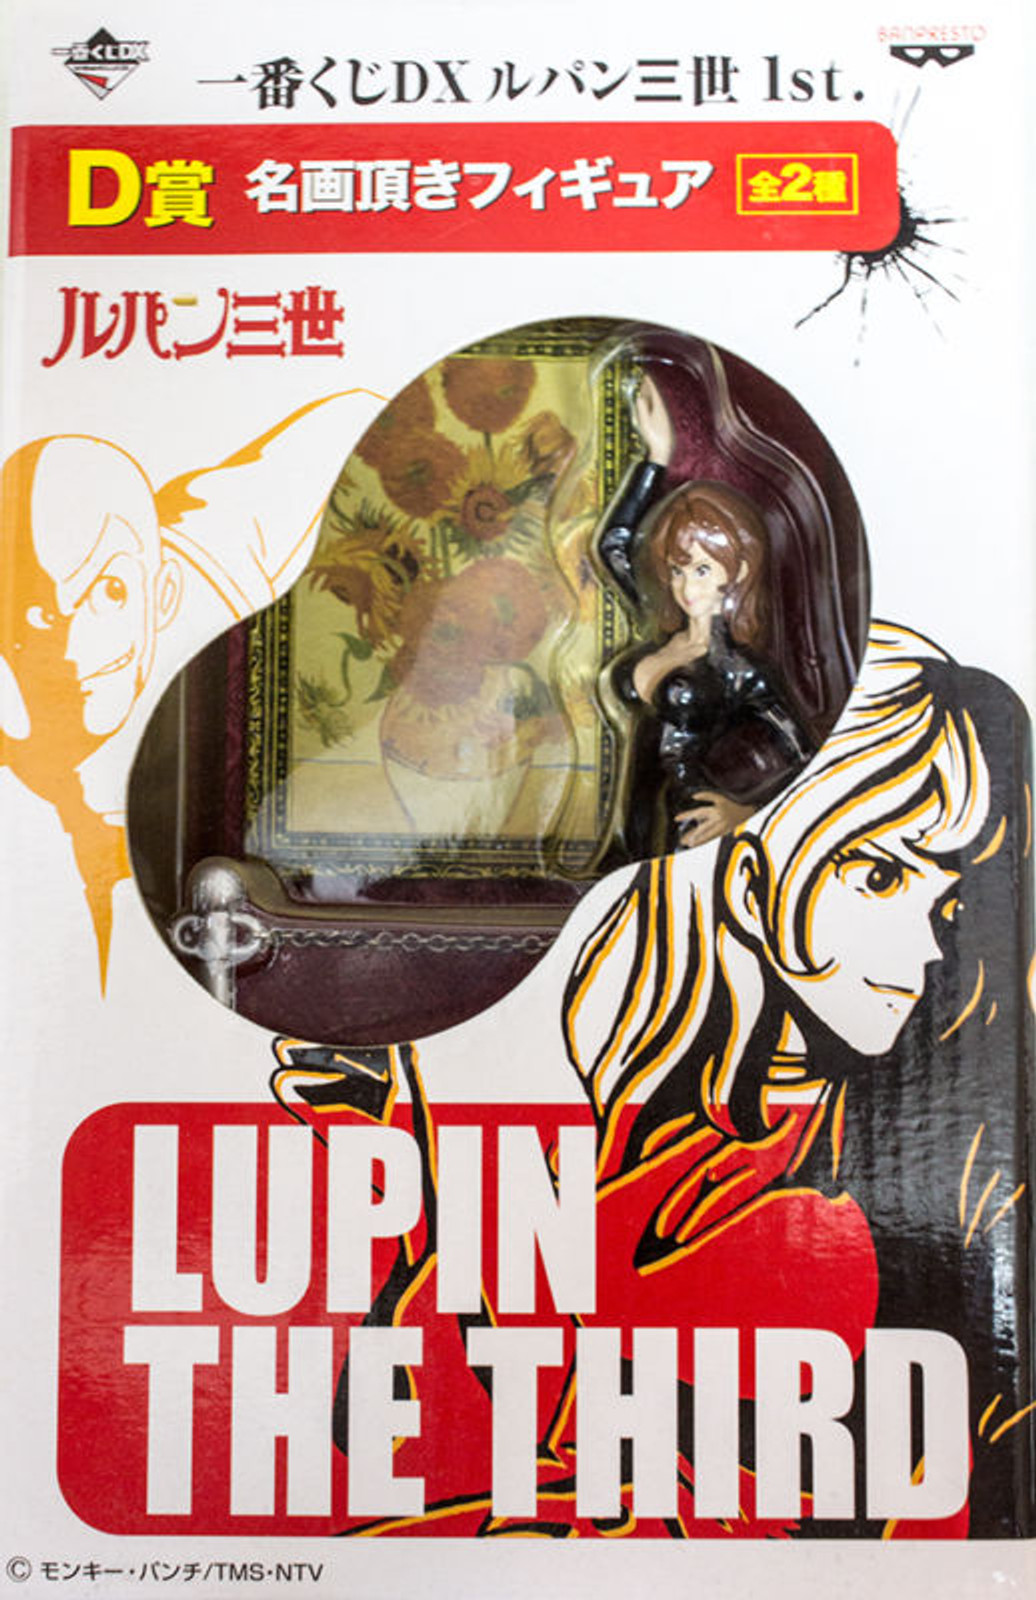 Lupin the Third (3rd) Fujiko Mine Steal Famaous Pictures Figure JAPAN ANIME MANGA